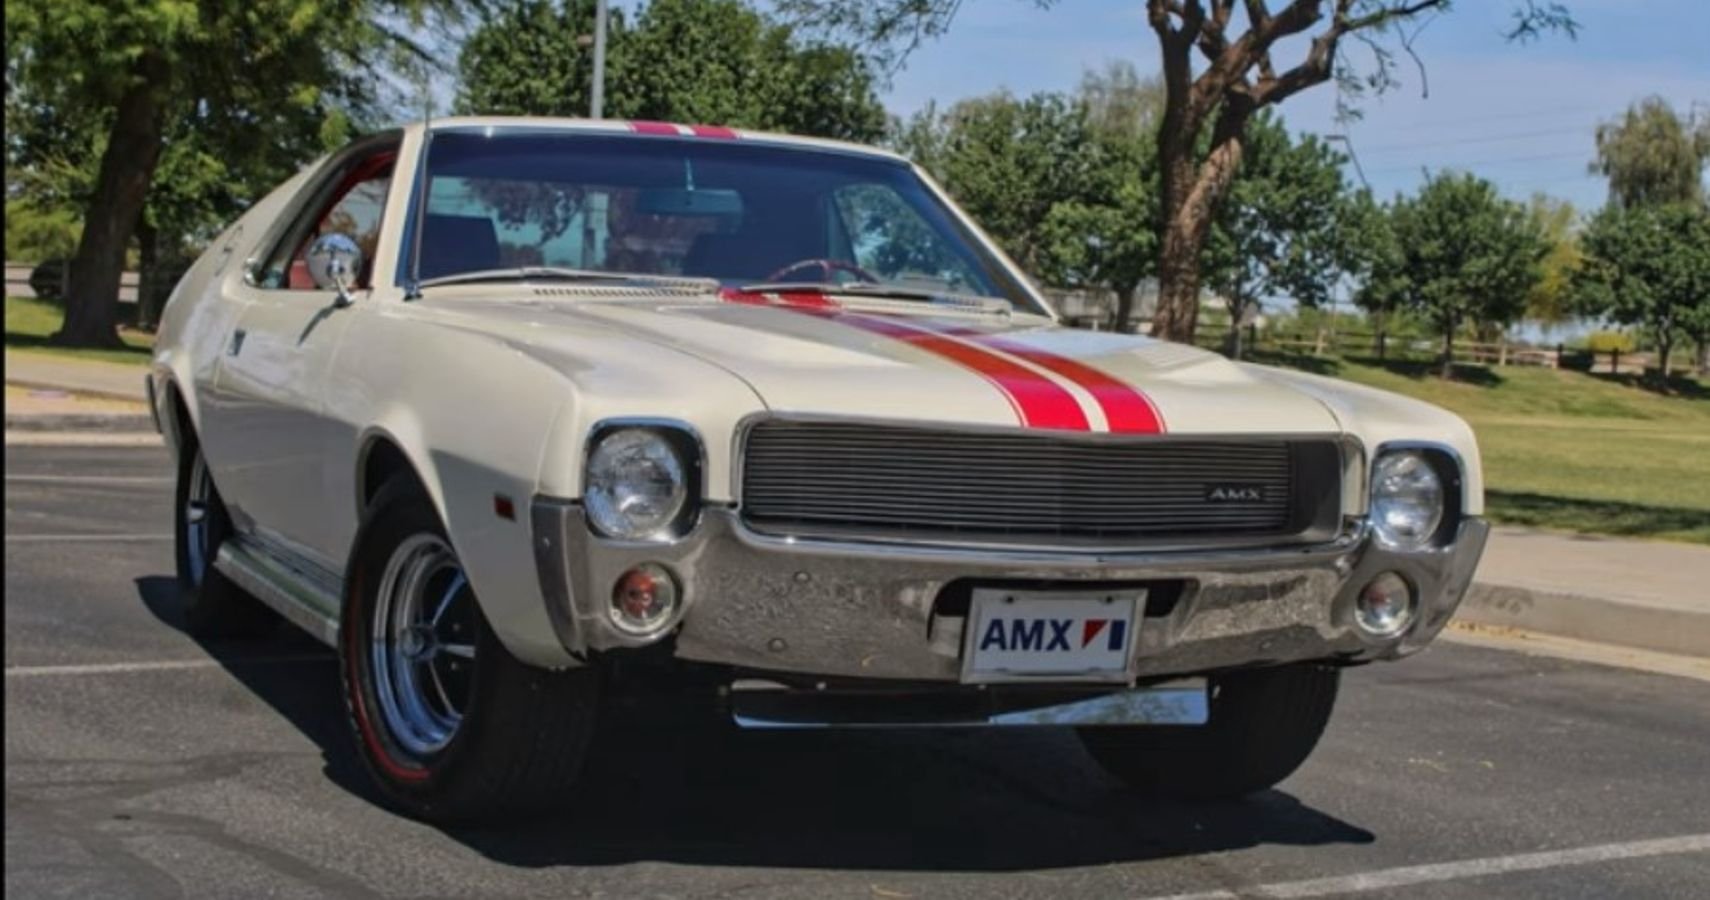 This 1969 AMC AMX Checks All The Boxes For A Cool Classic Muscle Car